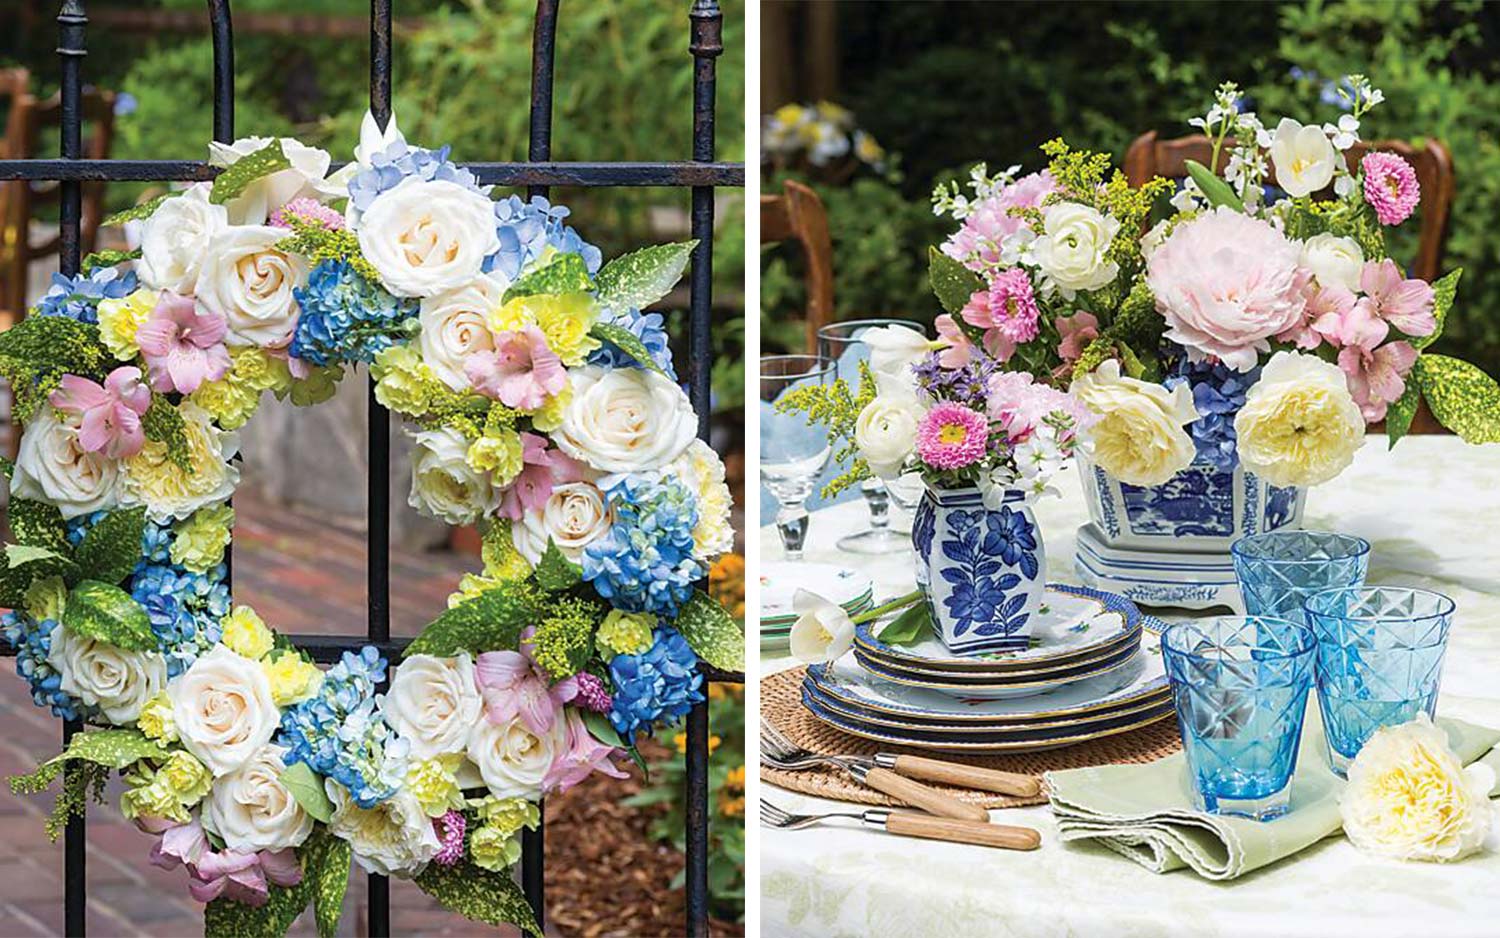 A floral wreath of pink, blue, yellow, and white blooms next to blue vasefuls of similar flowers